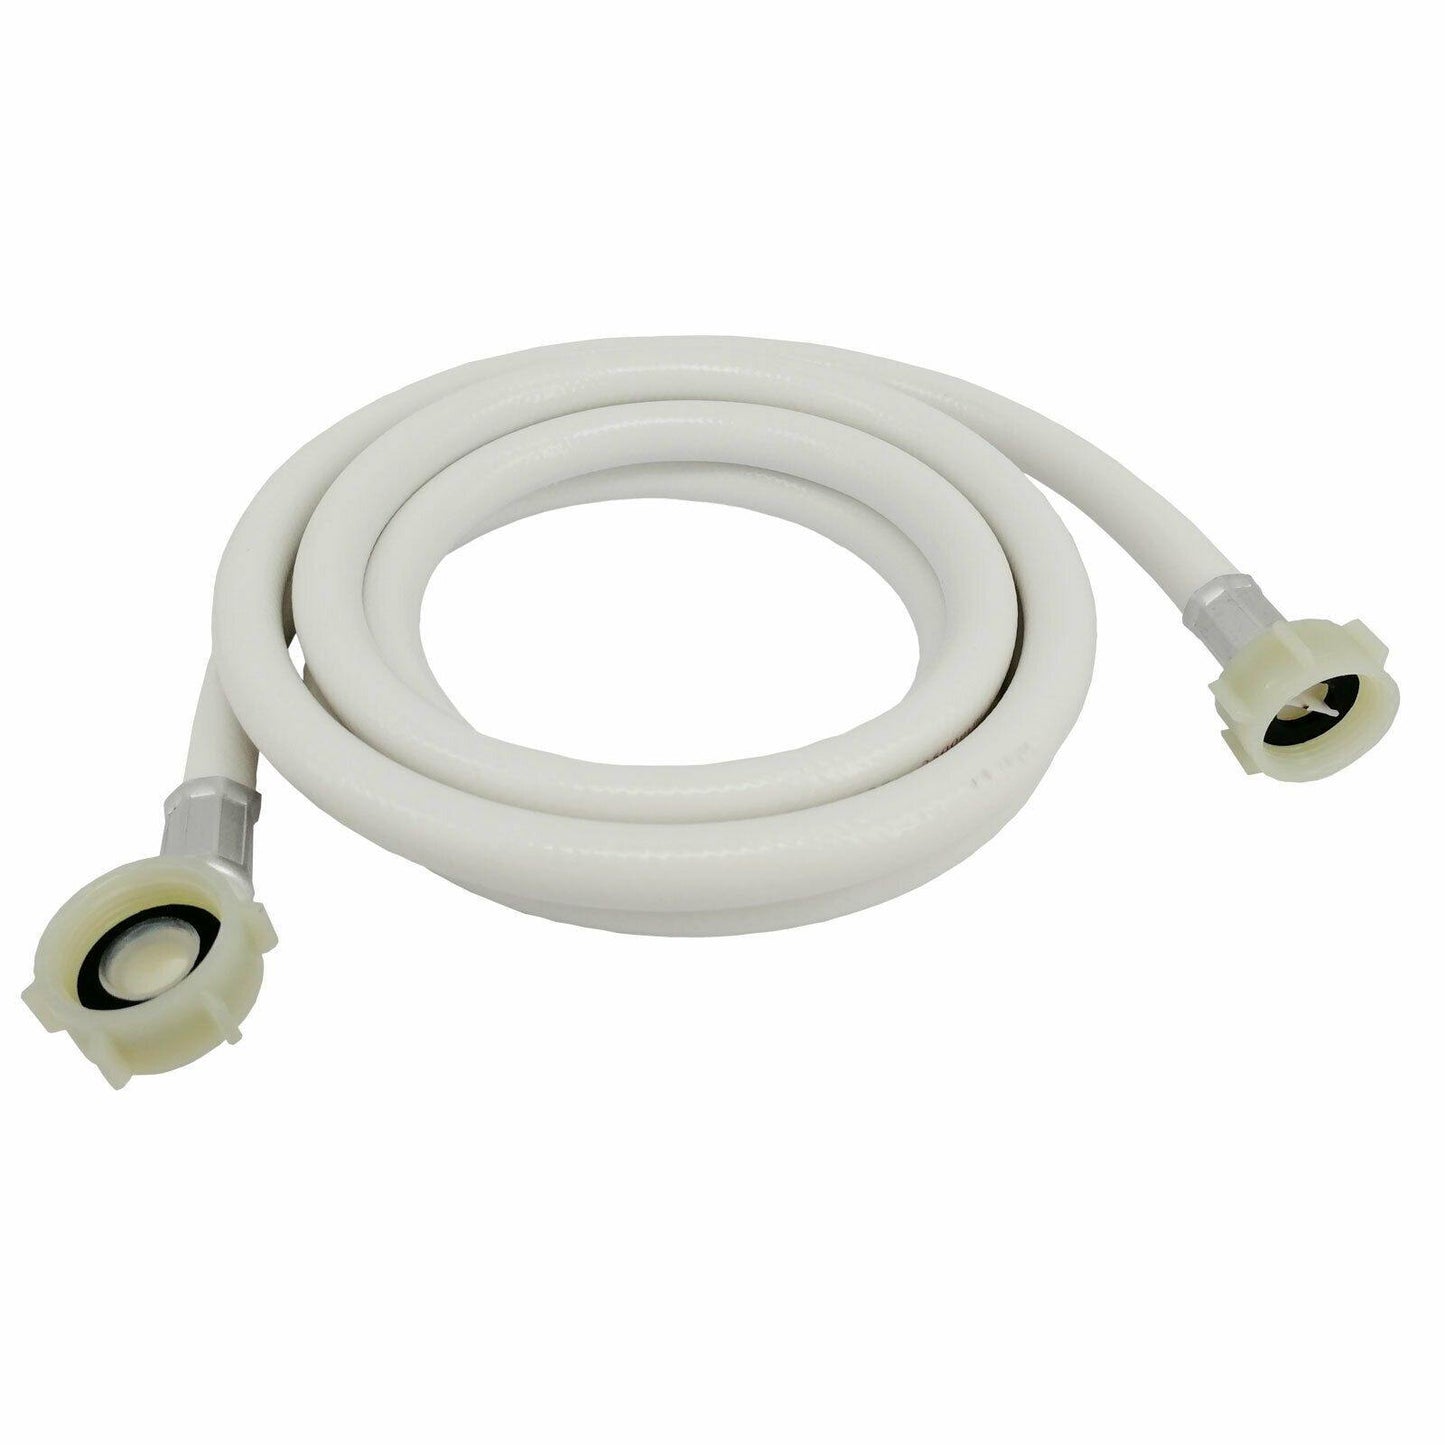 Washing Machine Hot / Cold Inlet Hose For LG WF-T6572 WT-H550 WT-H650 WT-H750 Sparesbarn